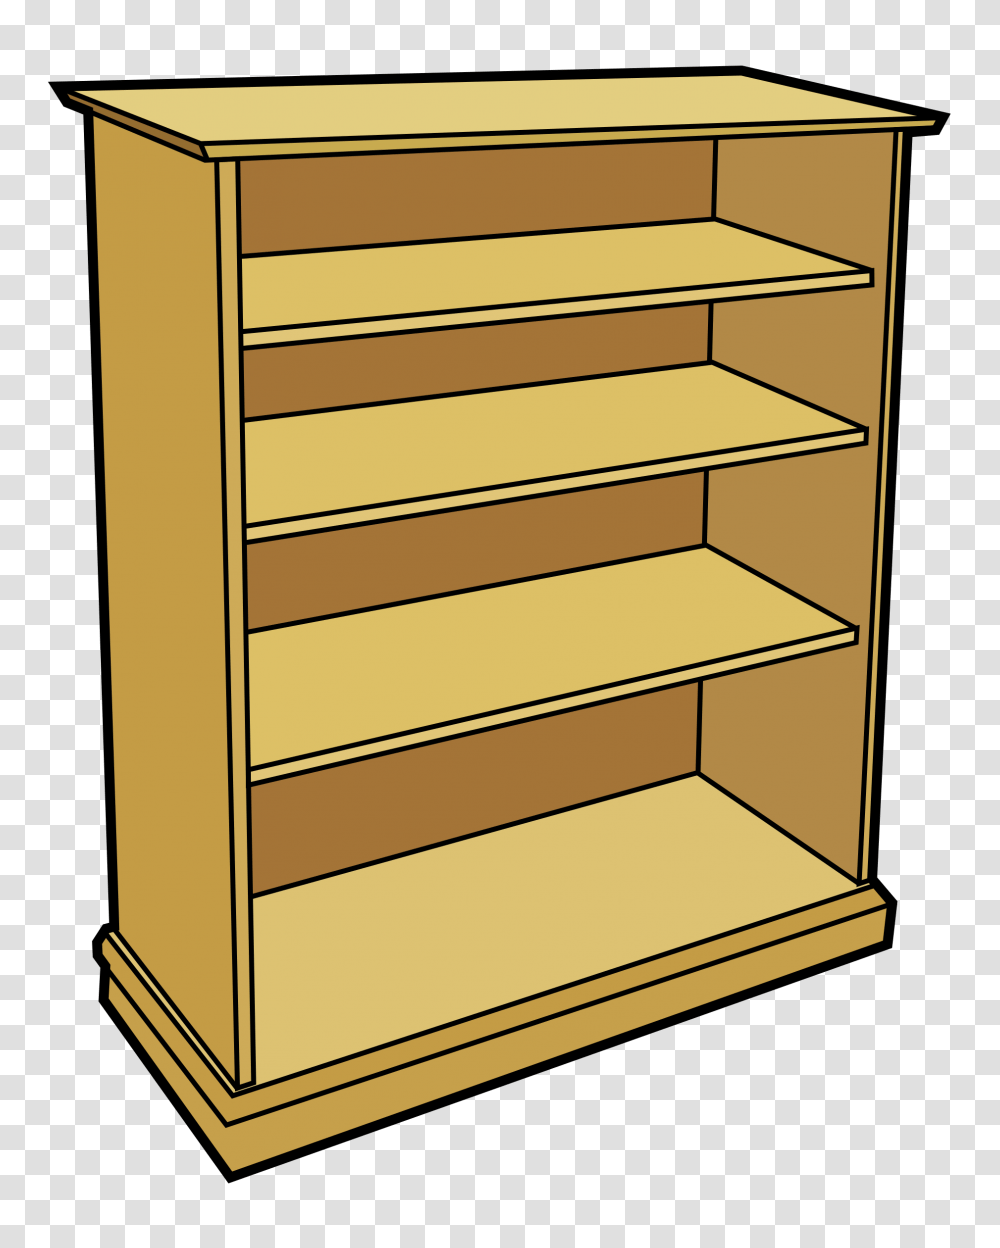 Bookcase Clipart Wooden Furniture Pencil And In Color Clip Art, Cupboard, Closet, Cabinet, Mailbox Transparent Png